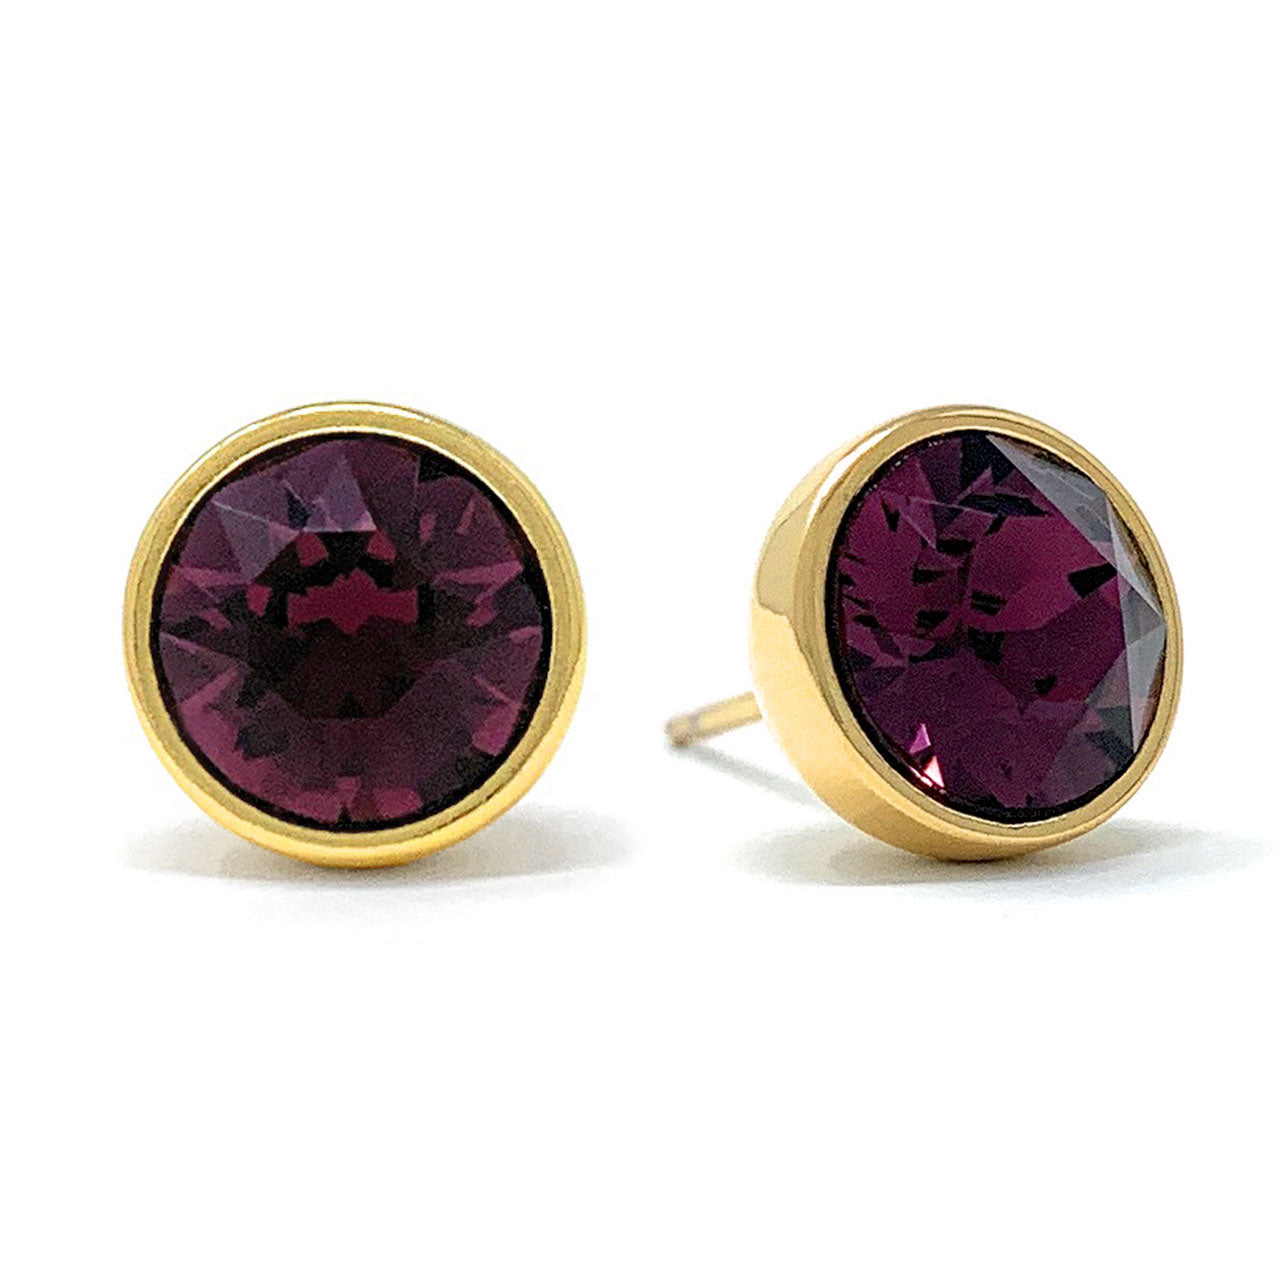 Harley Stud Earrings with Purple Amethyst Round Crystals from Swarovski Gold Plated - Ed Heart